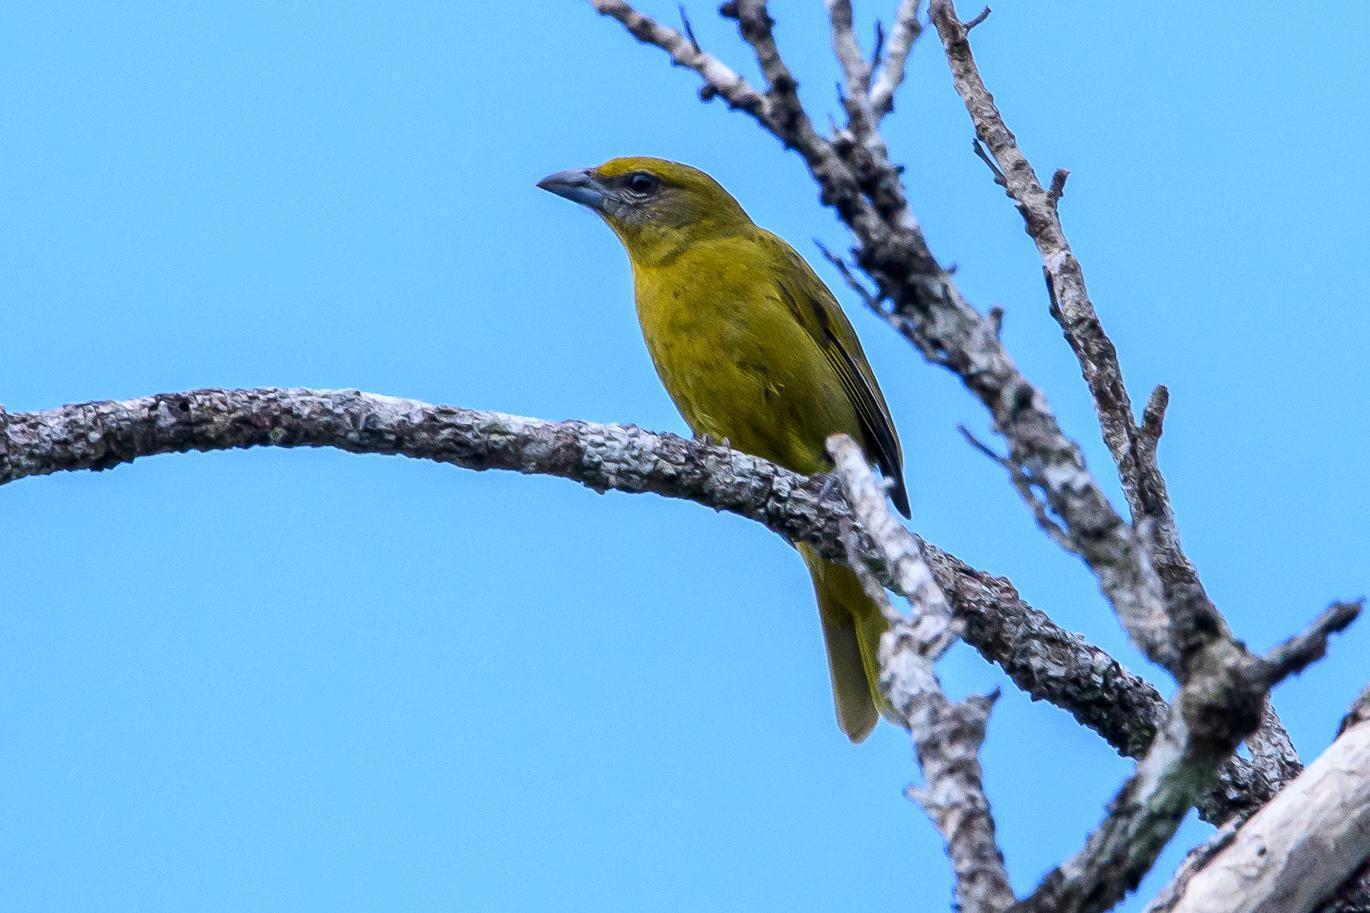 Hepatic Tanager Photo by Gerald Hoekstra